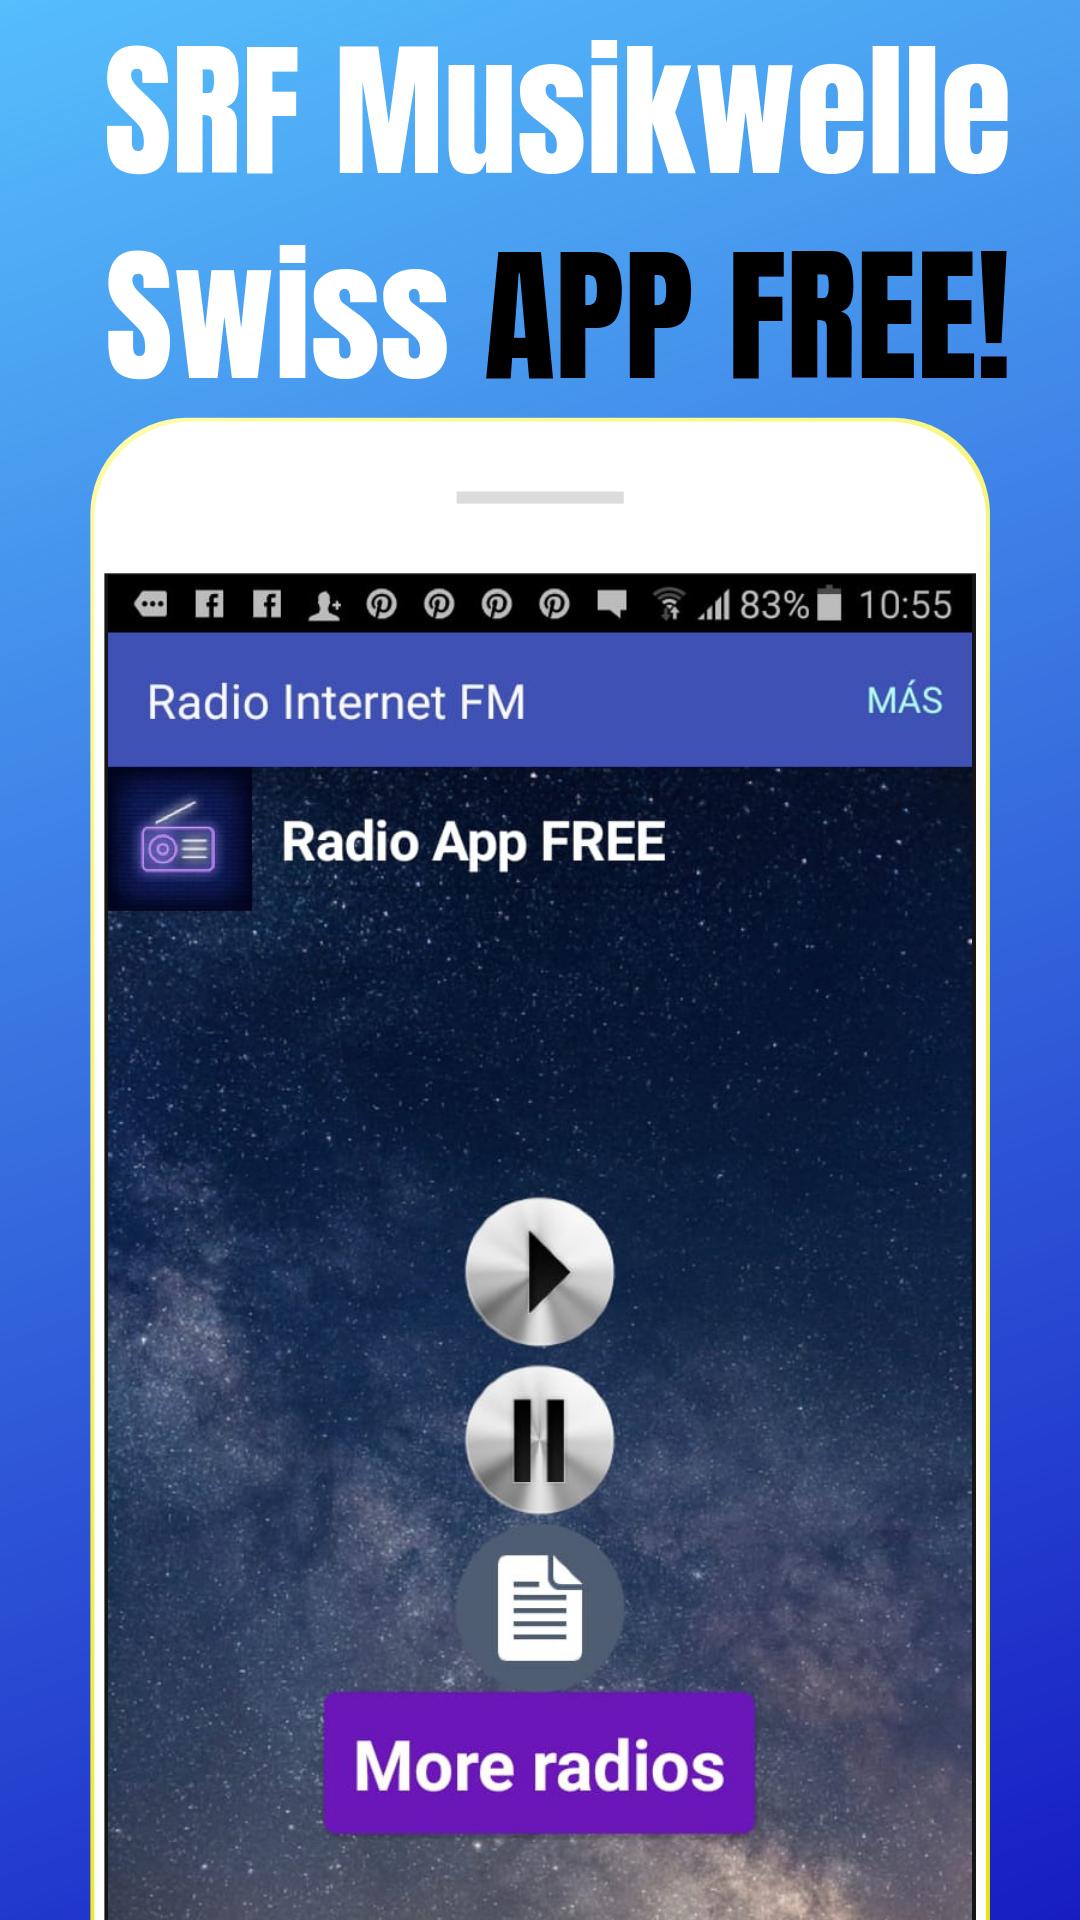 SRF Musikwelle Swiss Radio App Kostenlos AM FM CH for Android - APK Download